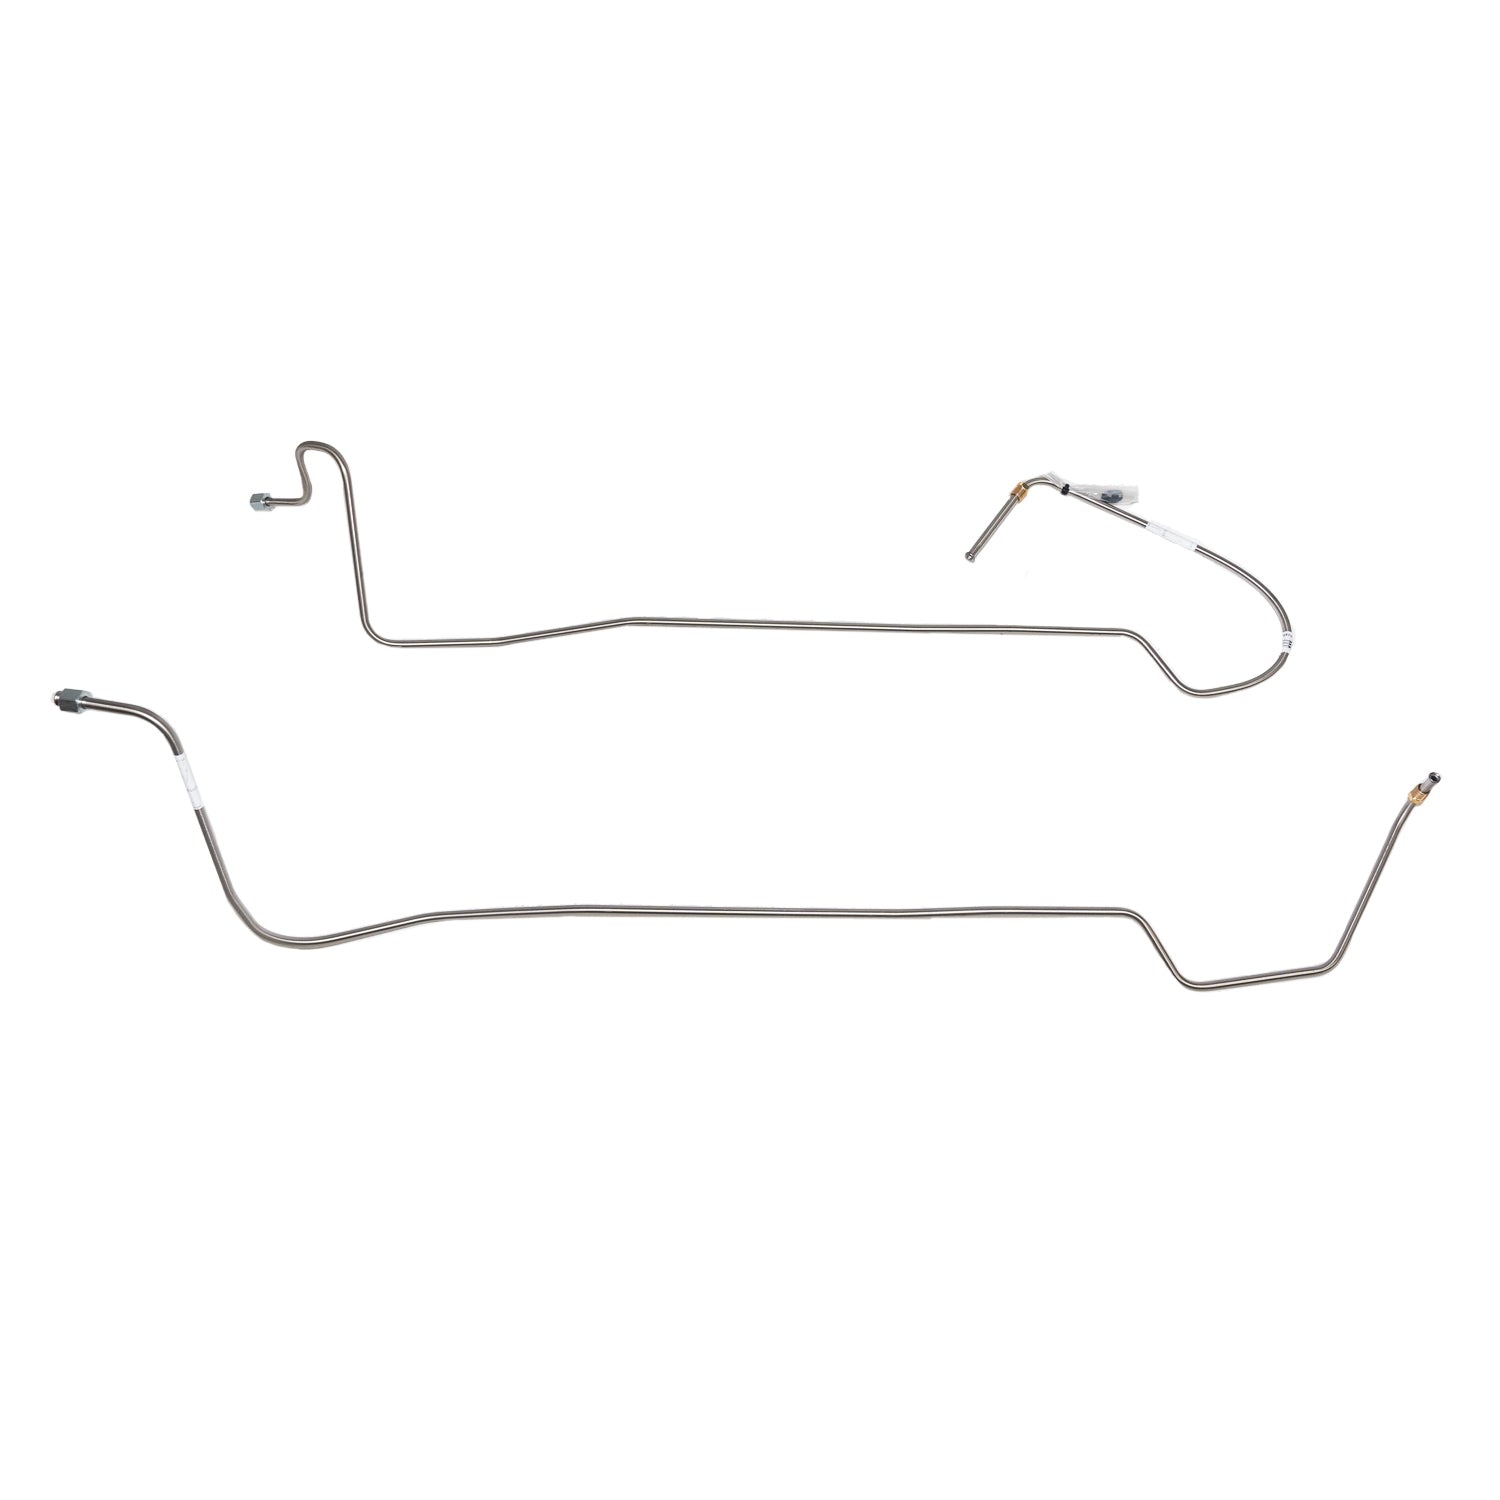 ZTC6702SS- 67-70 Ford Mustang & Mercury Cougar, 8cyl C4 Transmission Cooler Line, 2pc Set; Stainless - SSTubes